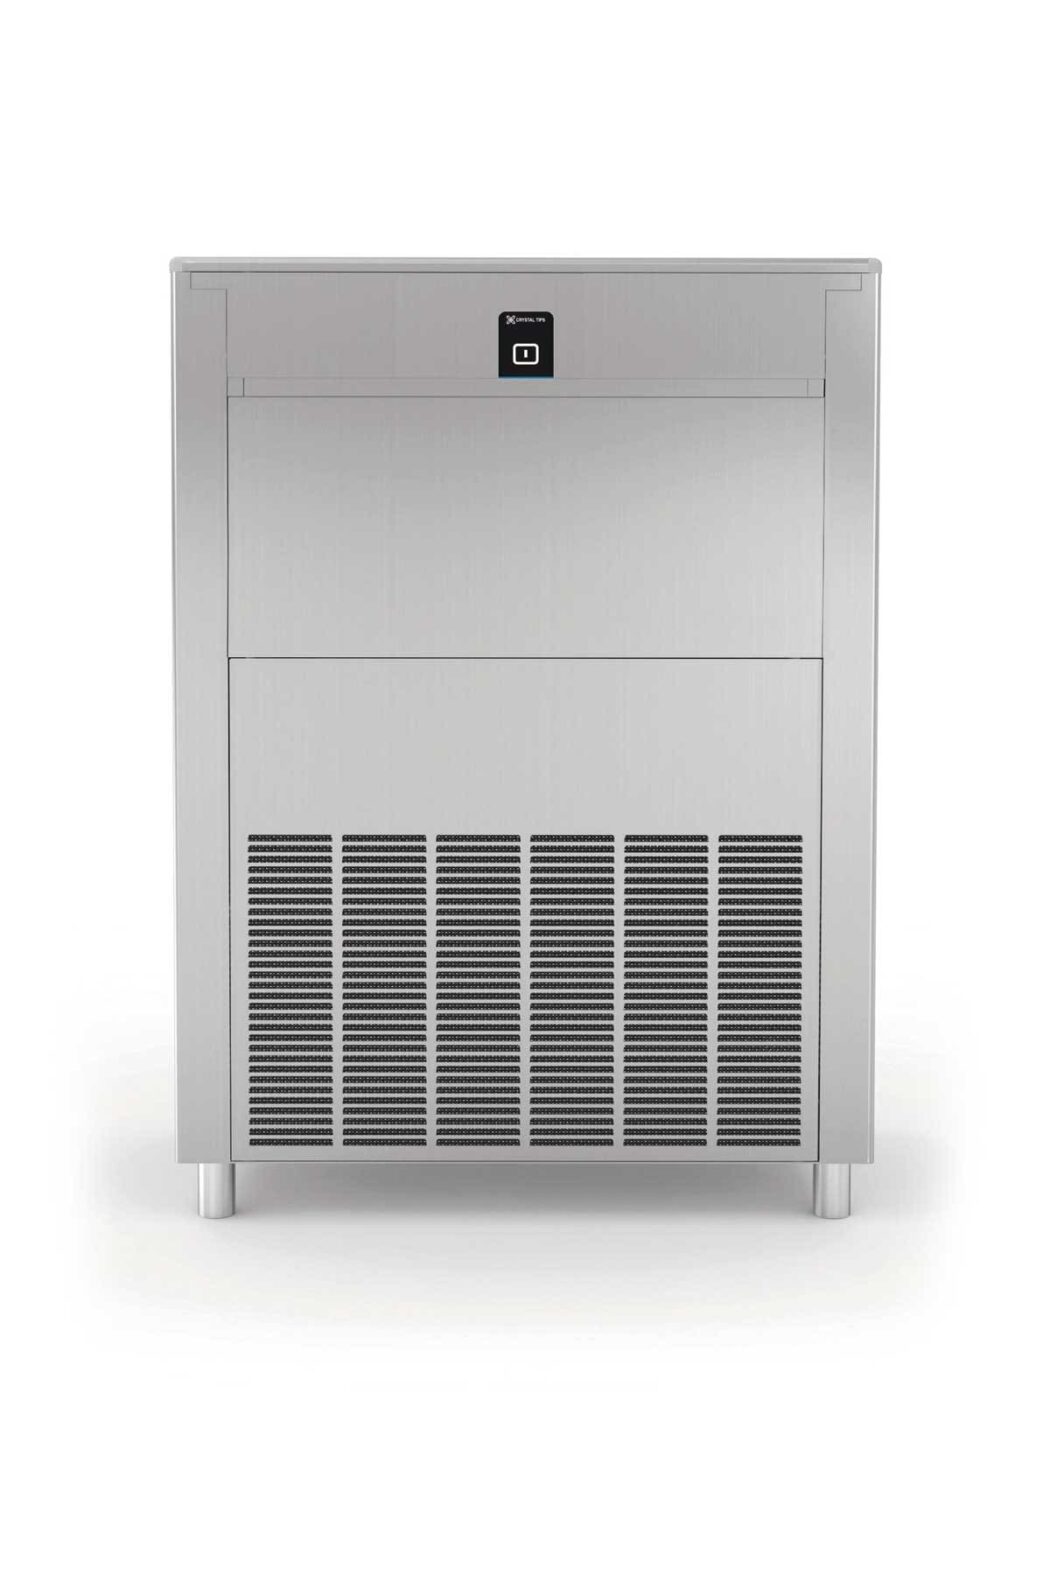 image of a Crystal Tips D145 ice machine with B105 bin.